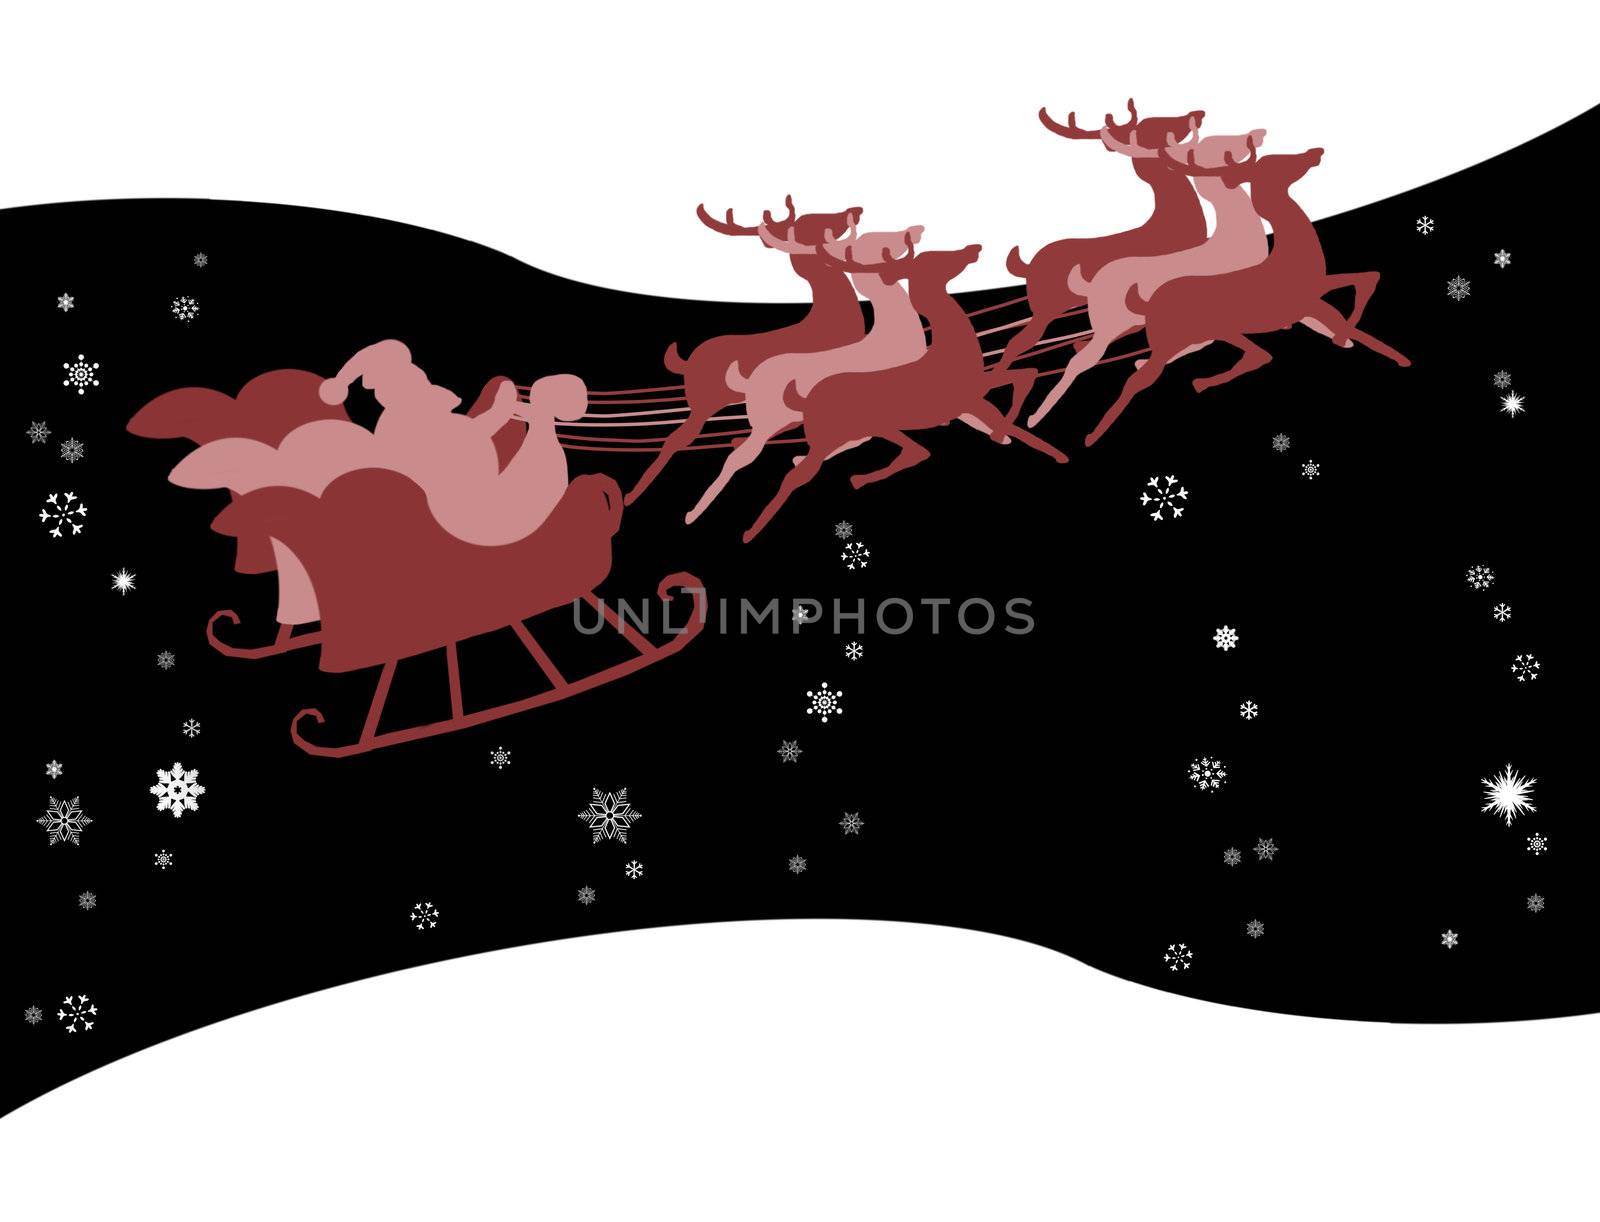 Santa Claus in his sleigh with snow, Christmas concept